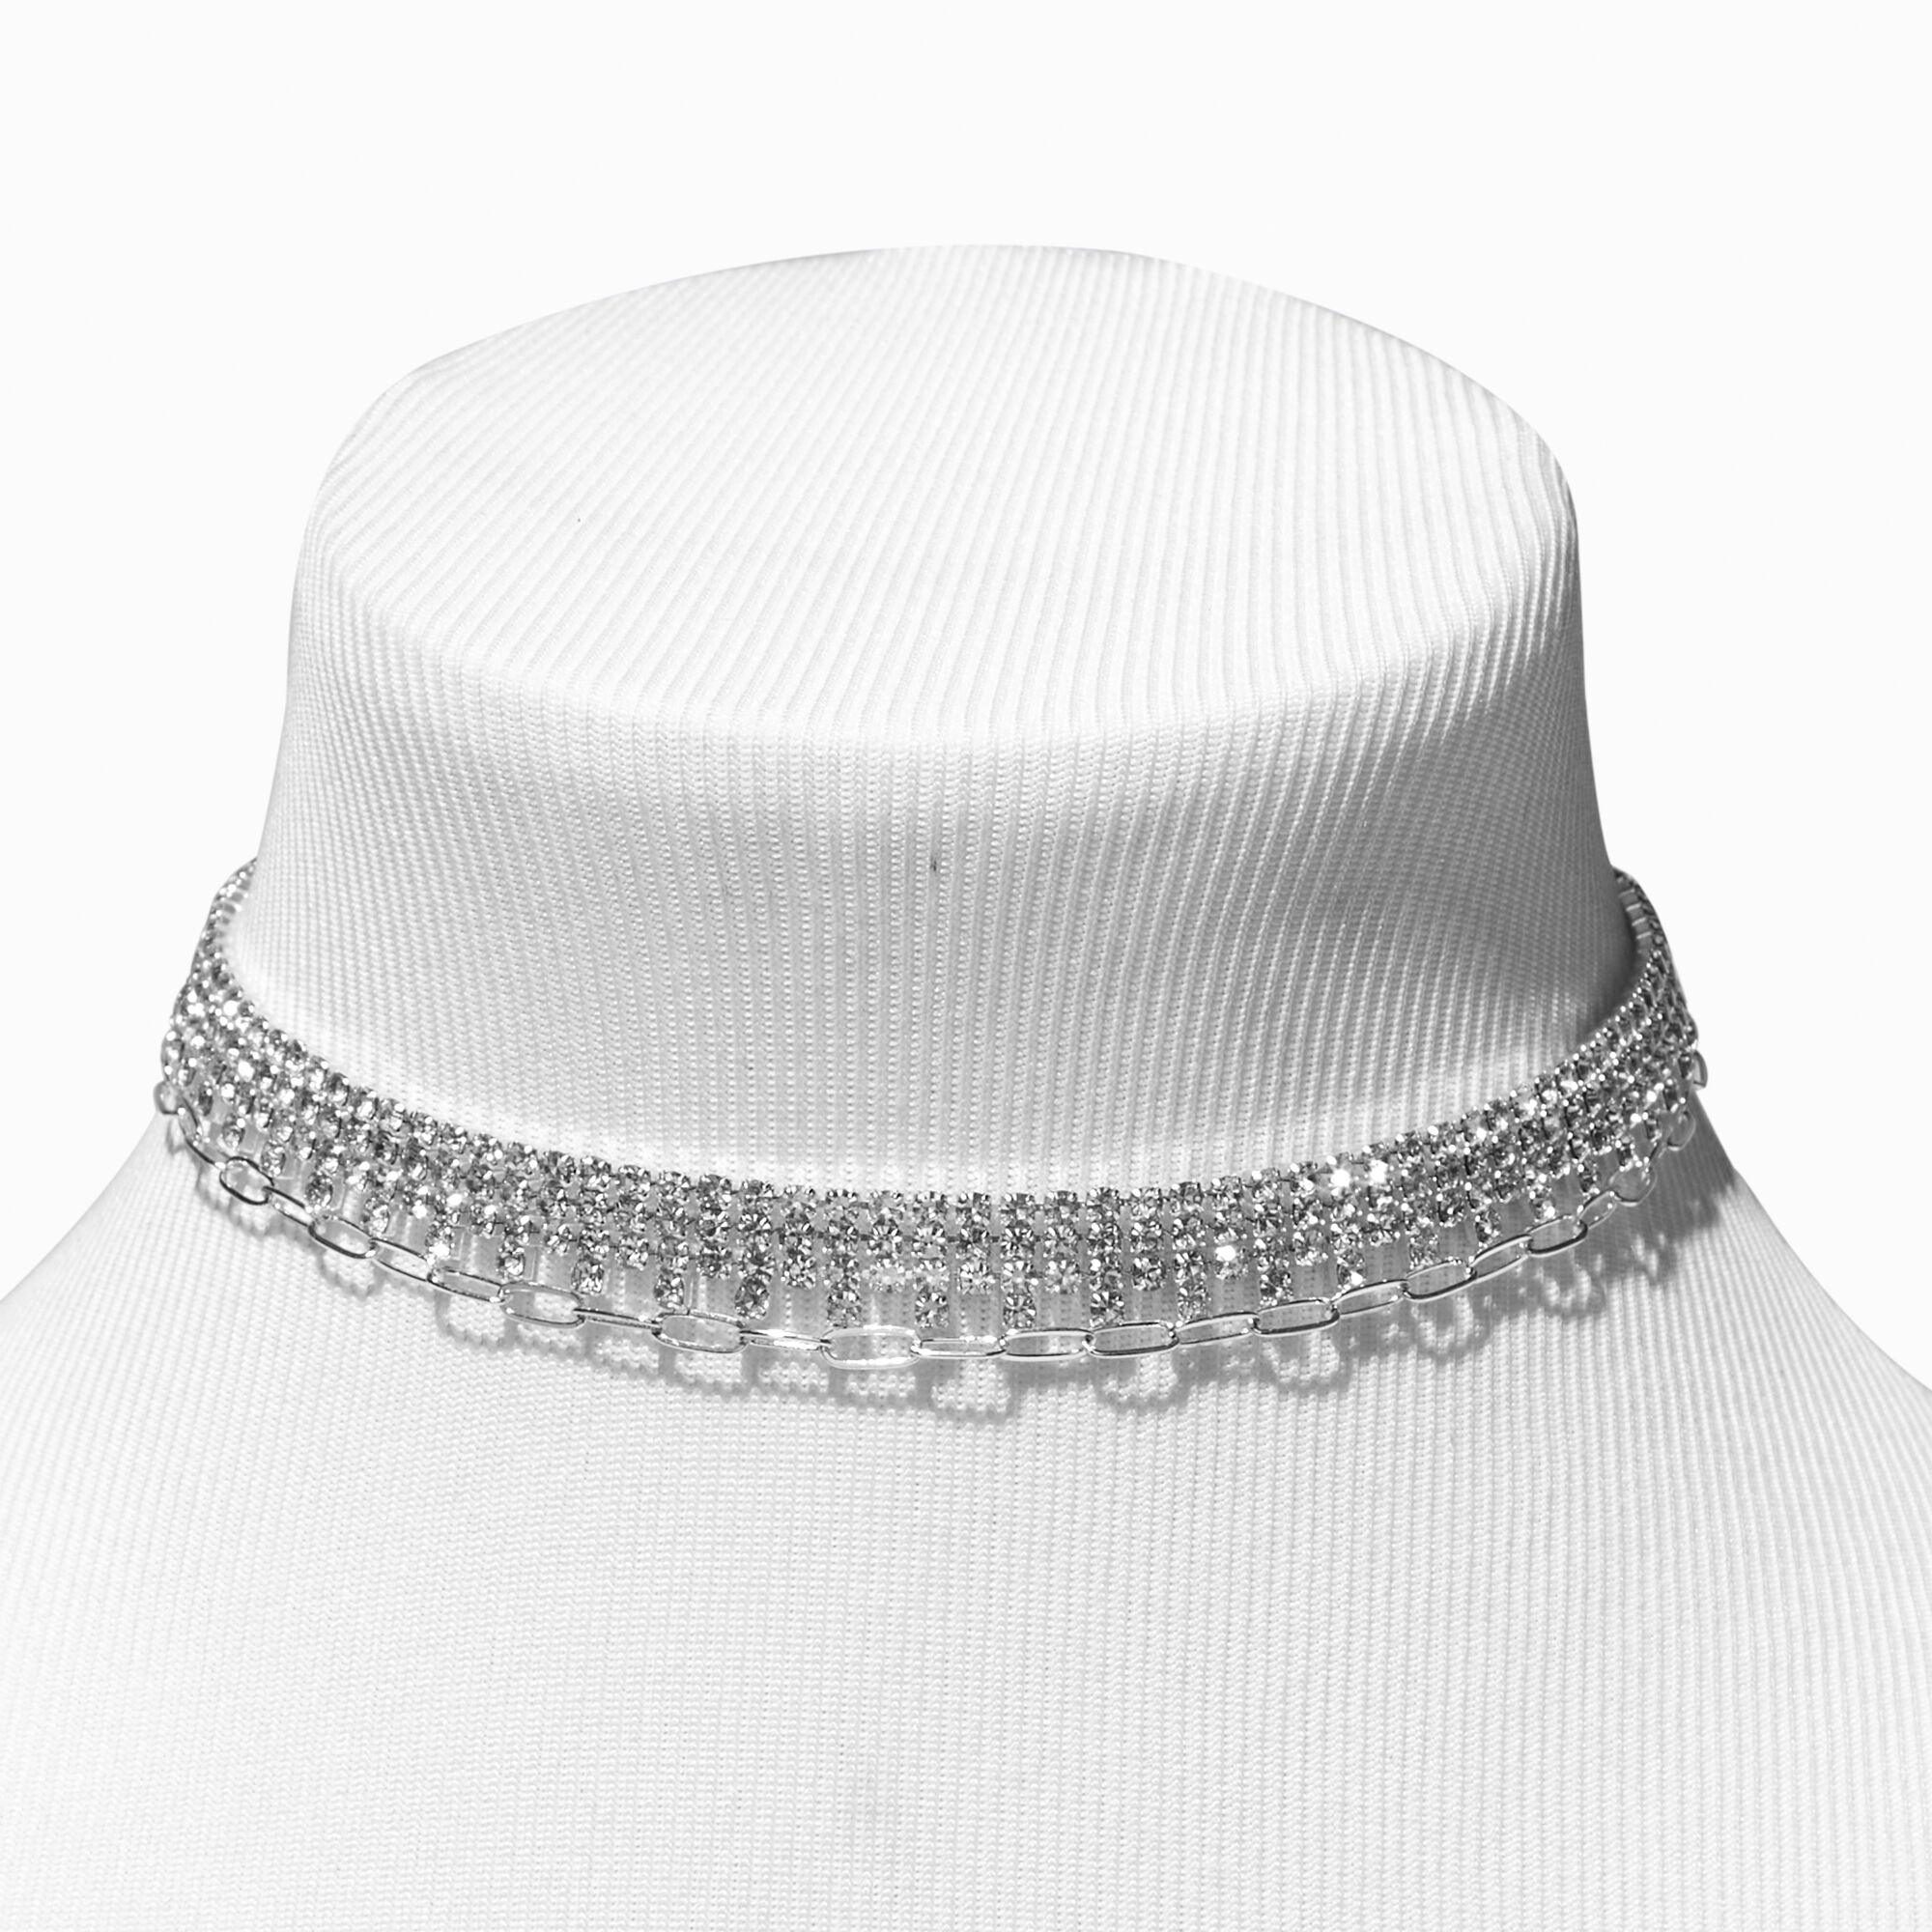 View Claires Tone Rhinestone Choker Necklaces 3 Pack Silver information